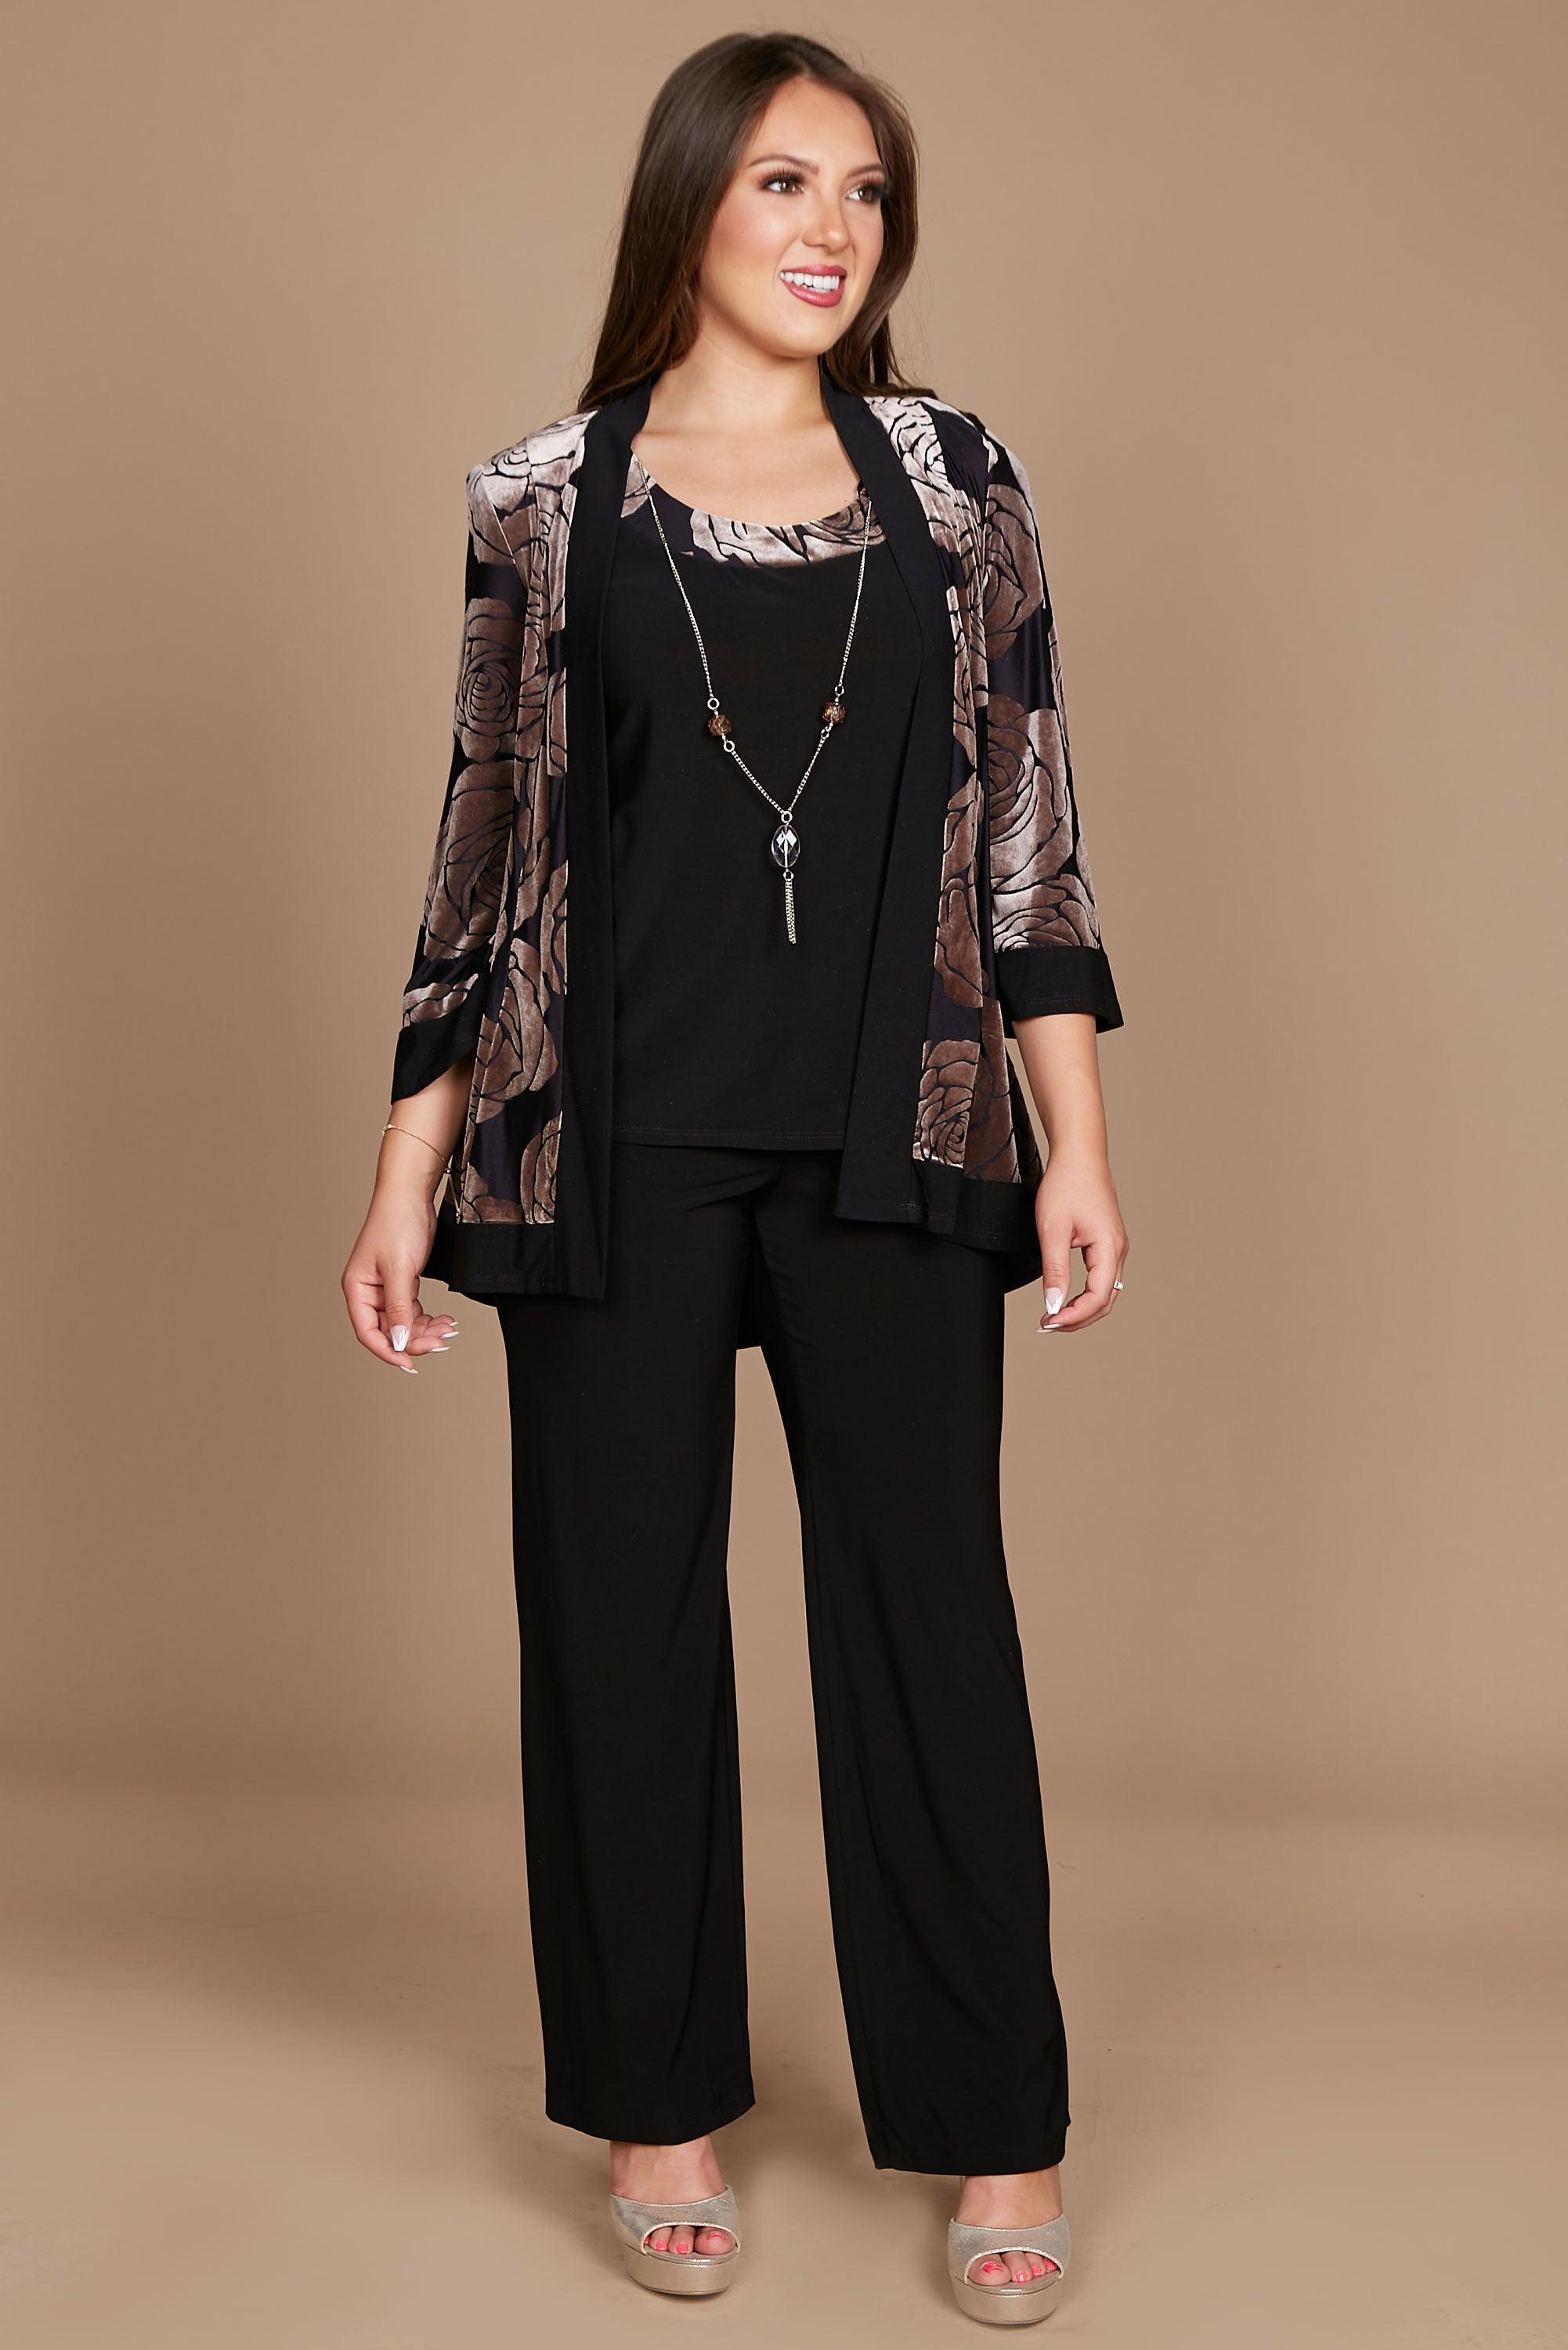 Taupe/Black R&M Richards 9017P Formal Petite Pant Suit for $91.99, – The  Dress Outlet